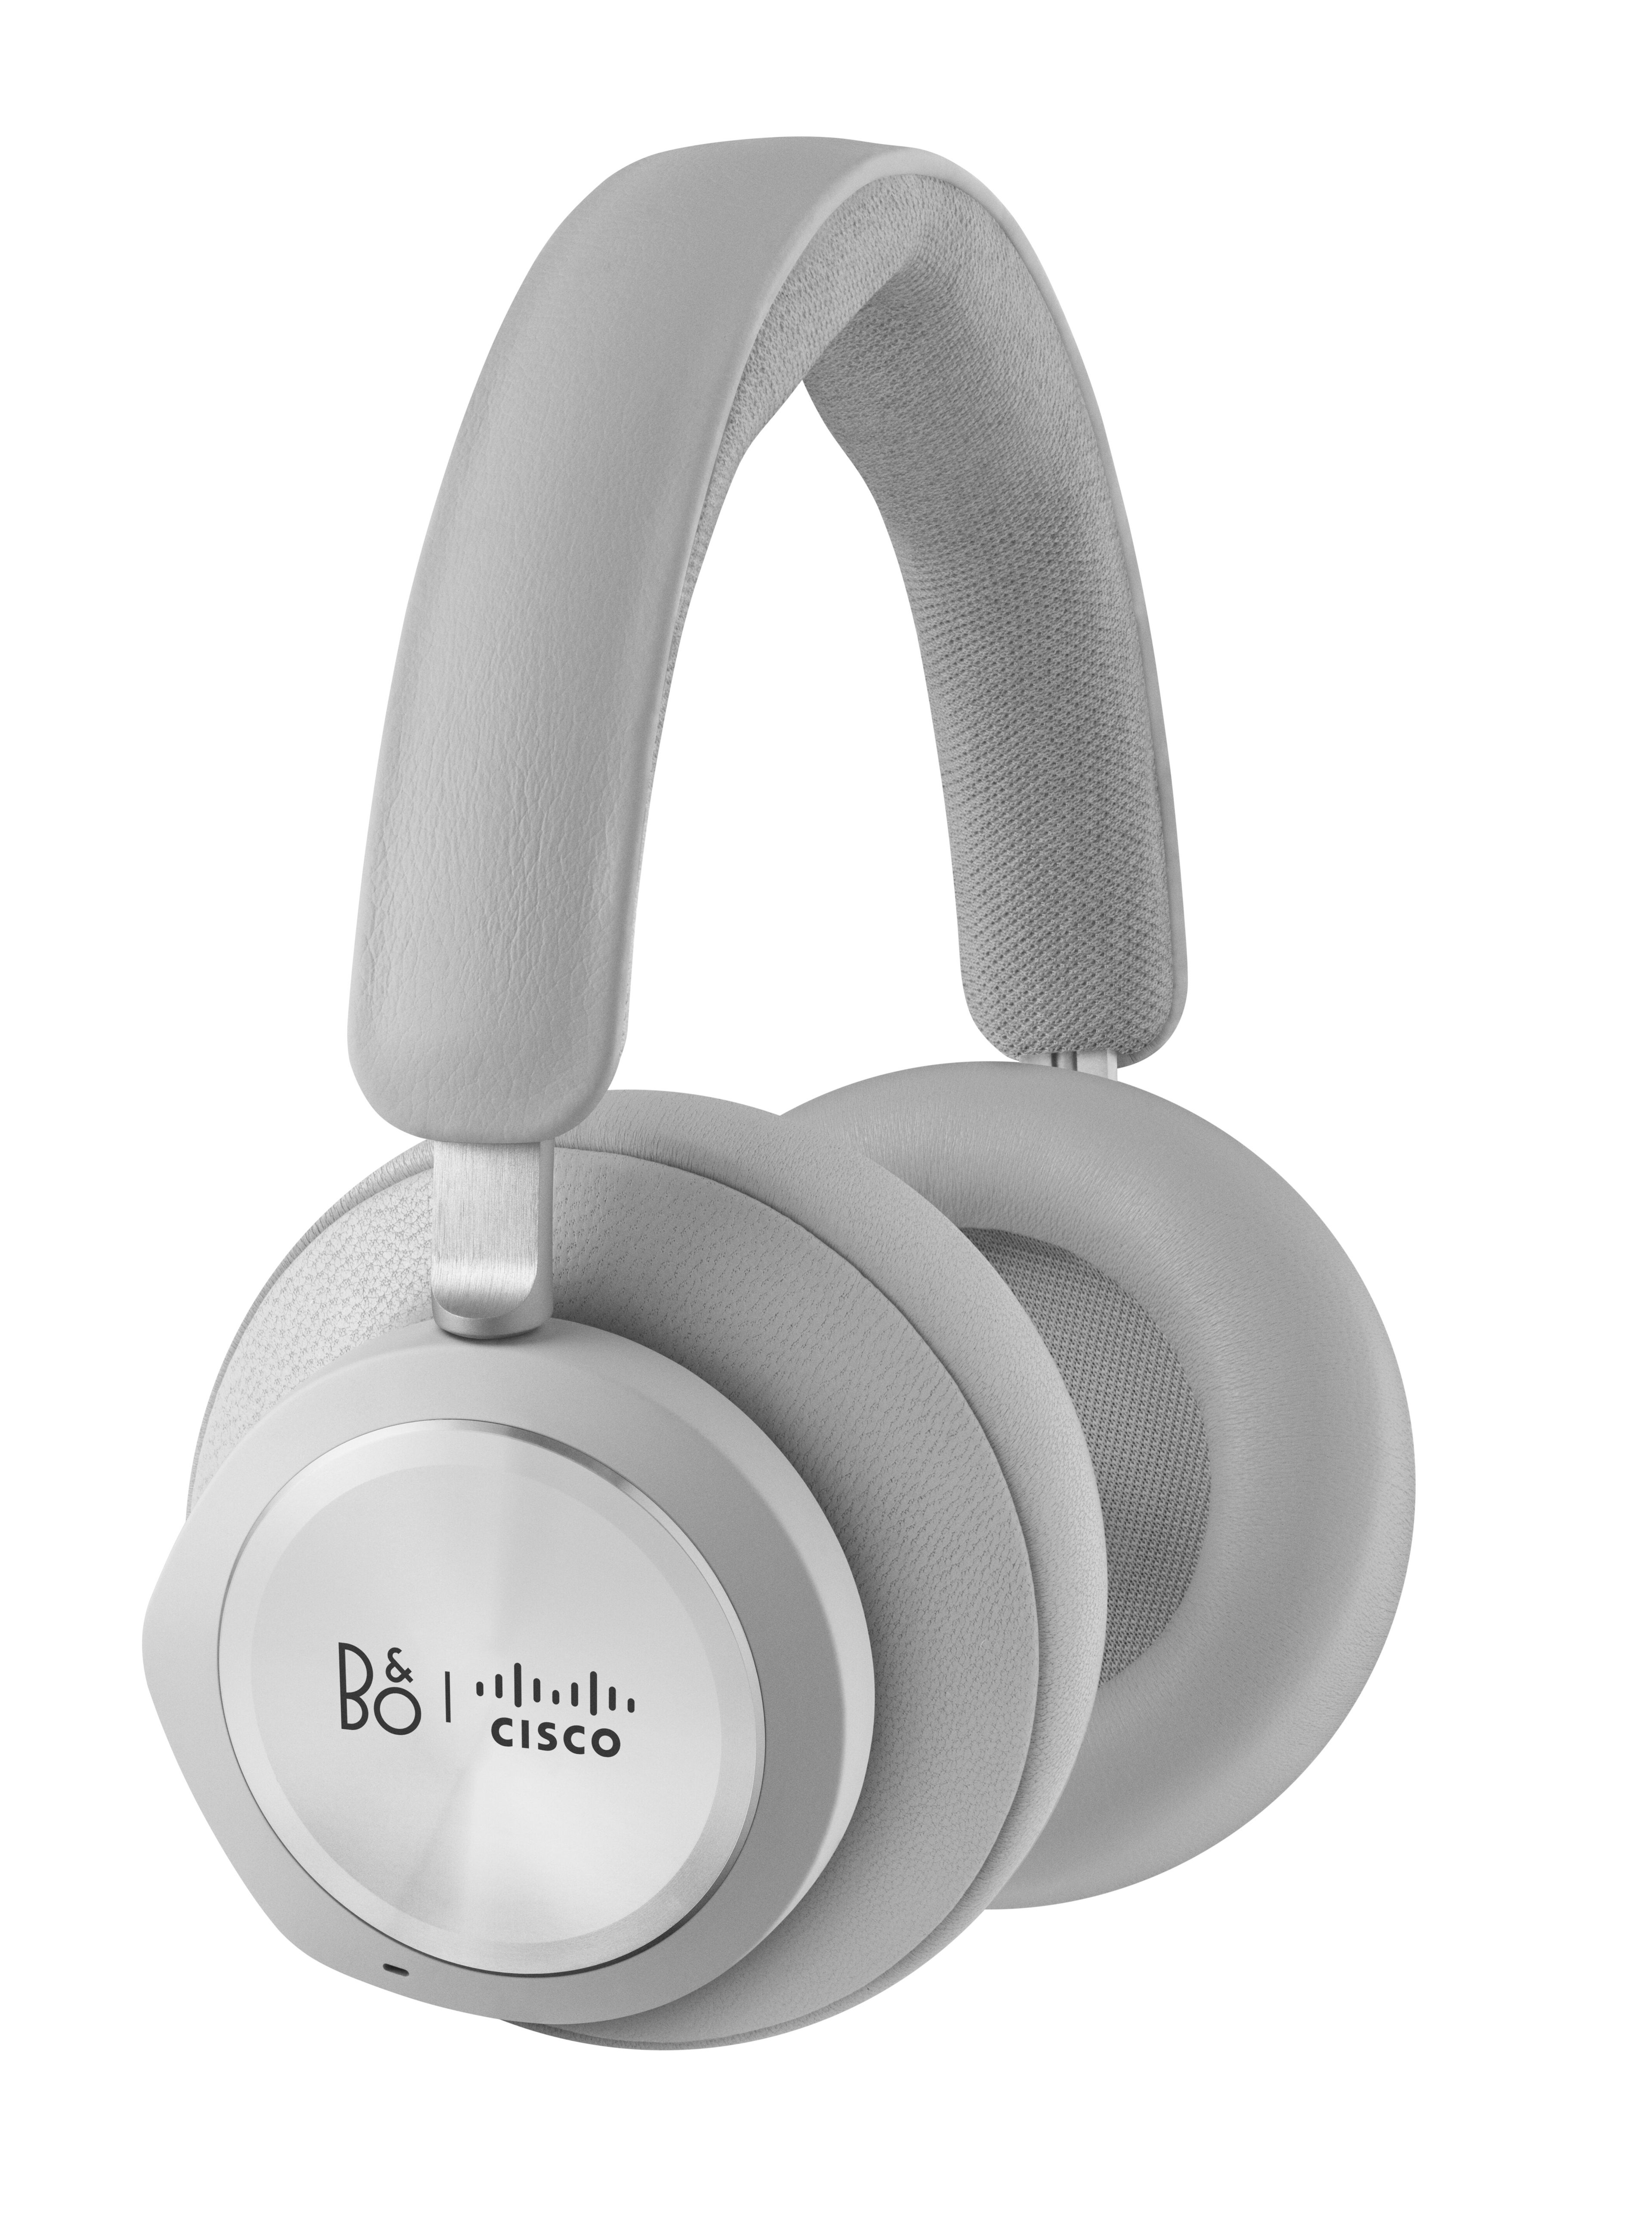 A side view of the Bang & Olufsen Cisco 980 headset. The Bang & Olufsen and Cisco logos are visible on the outside of the ear cup.